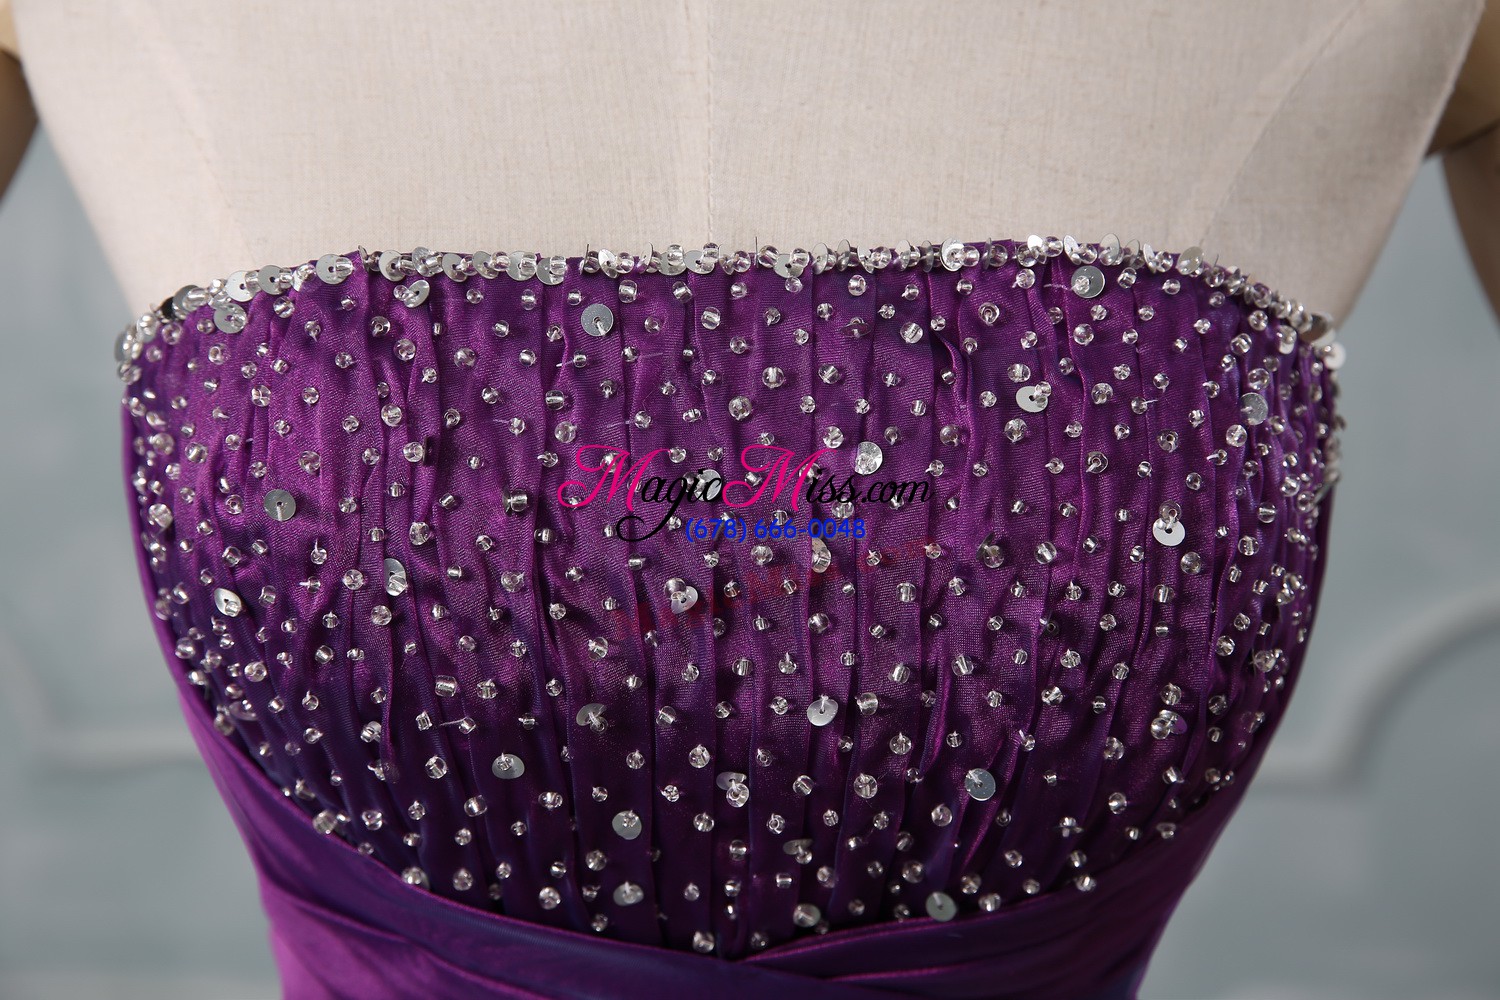 wholesale luxurious purple quinceanera gowns sweet 16 and quinceanera with beading strapless sleeveless lace up